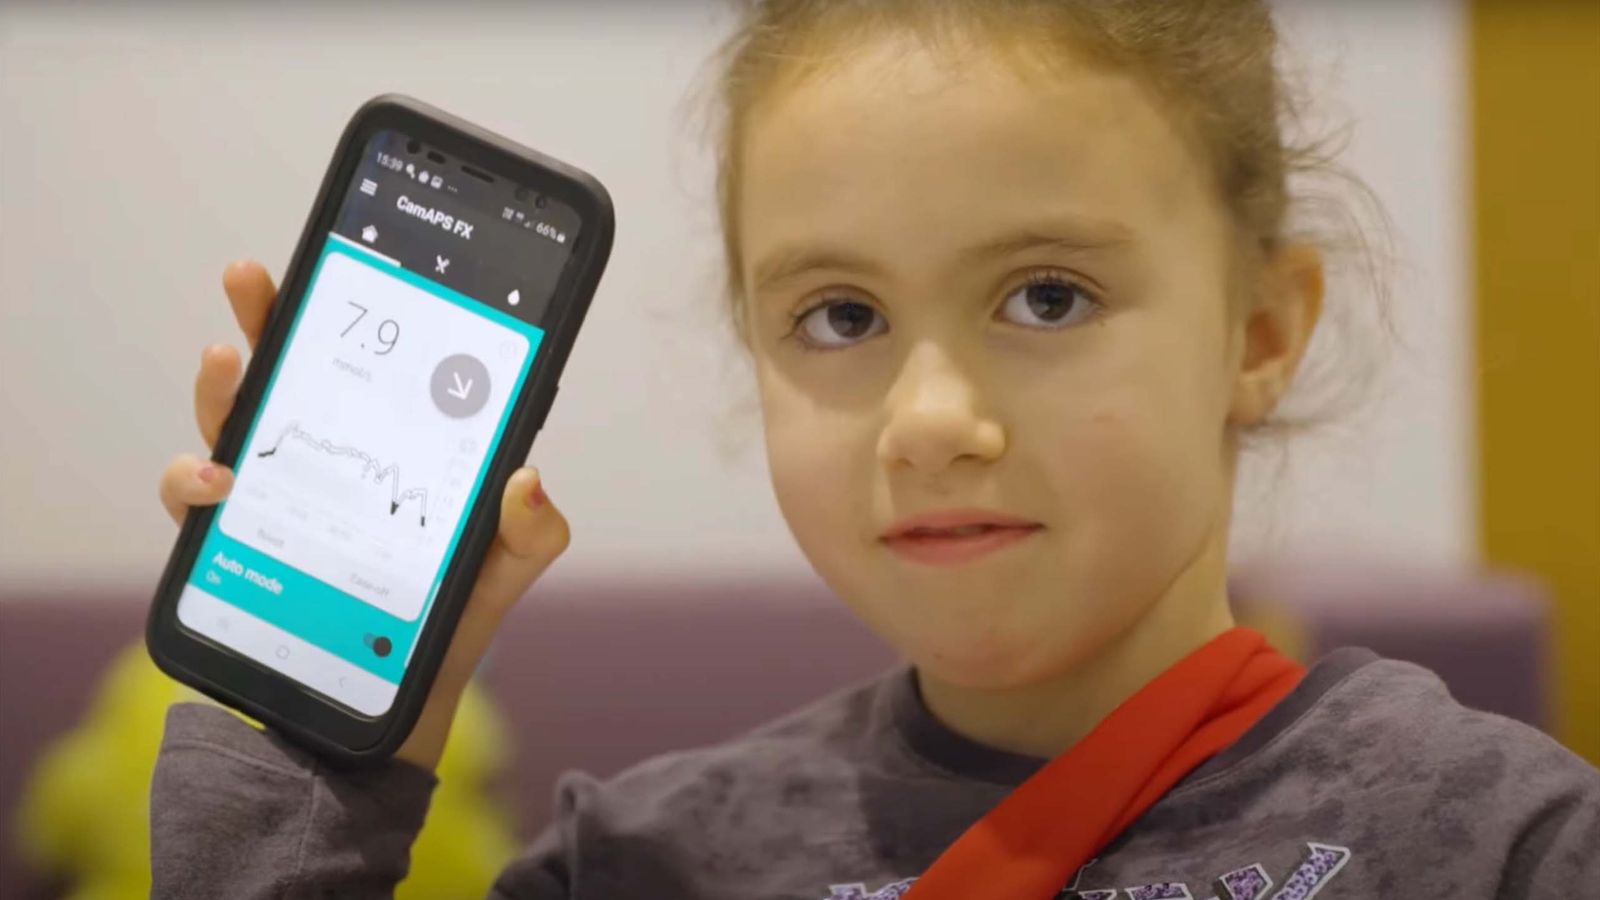 Type 1 diabetes: Artificial pancreas ‘life-changing’ for very young children, experts say | Science & Tech News